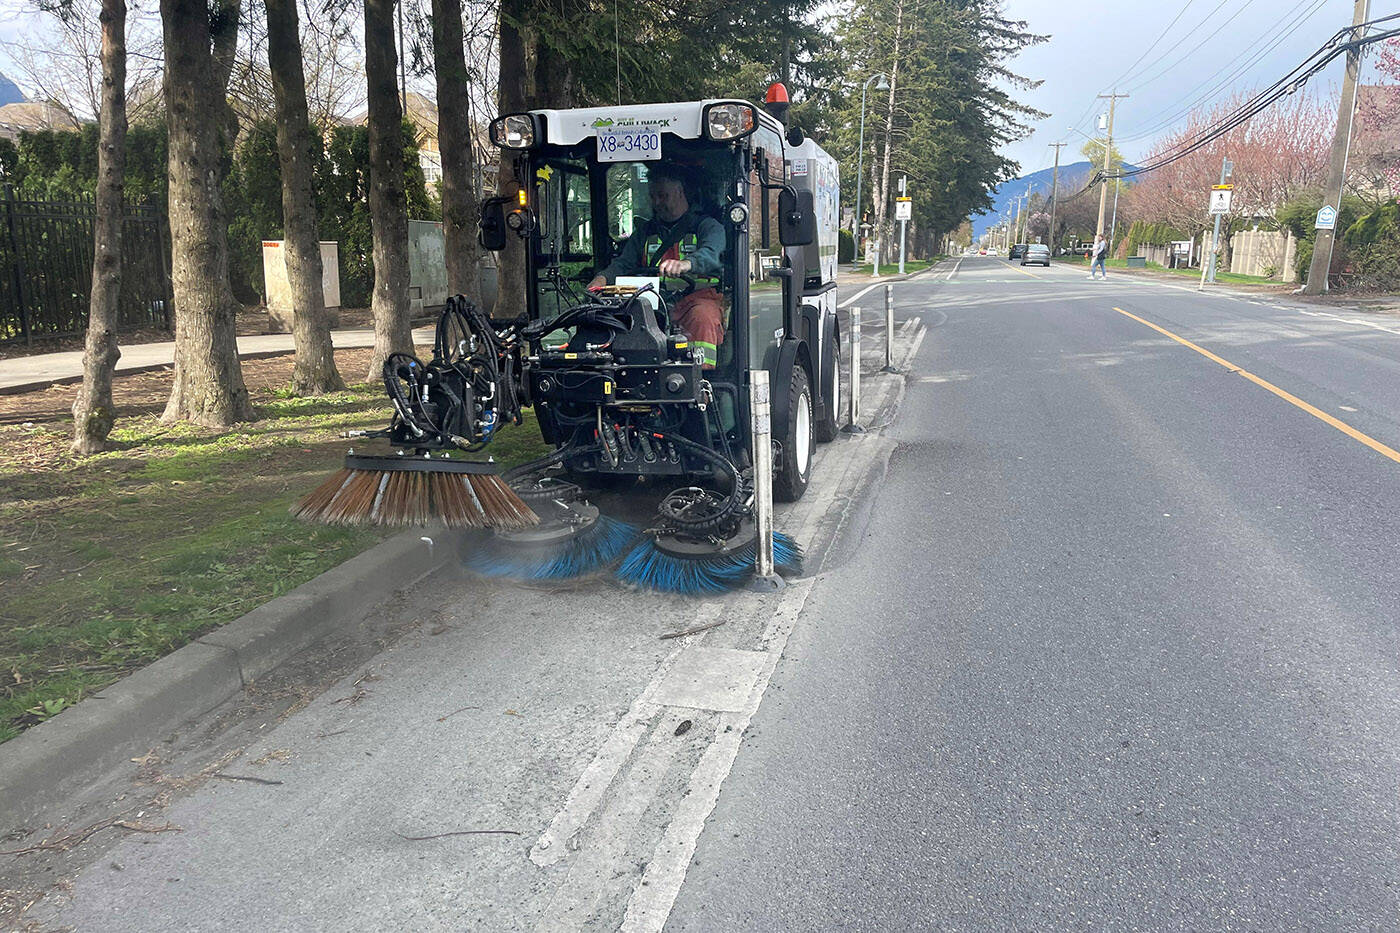 The City of Chilliwack bought this bike lane sweeper to clean in between the protective bollards and curb, the area where a standard street sweeper cannot access. (City of Chilliwack)